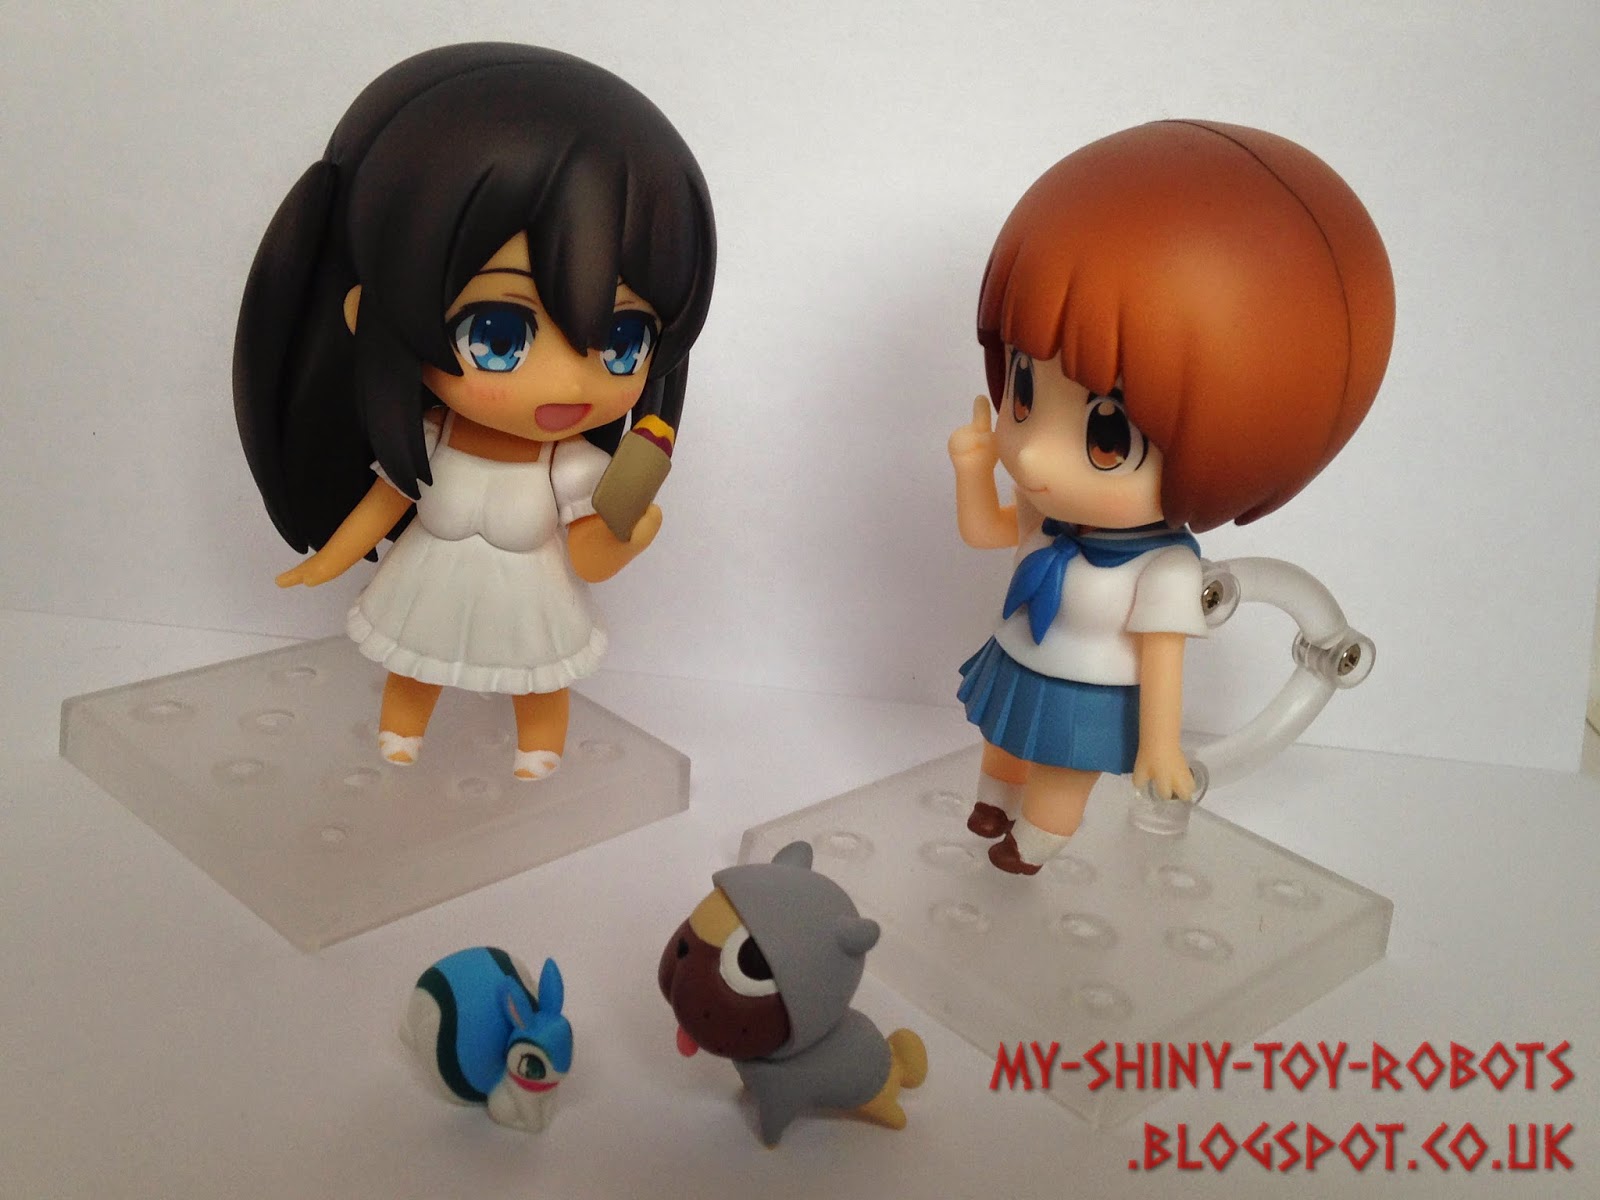 Meeting other Nendoroids